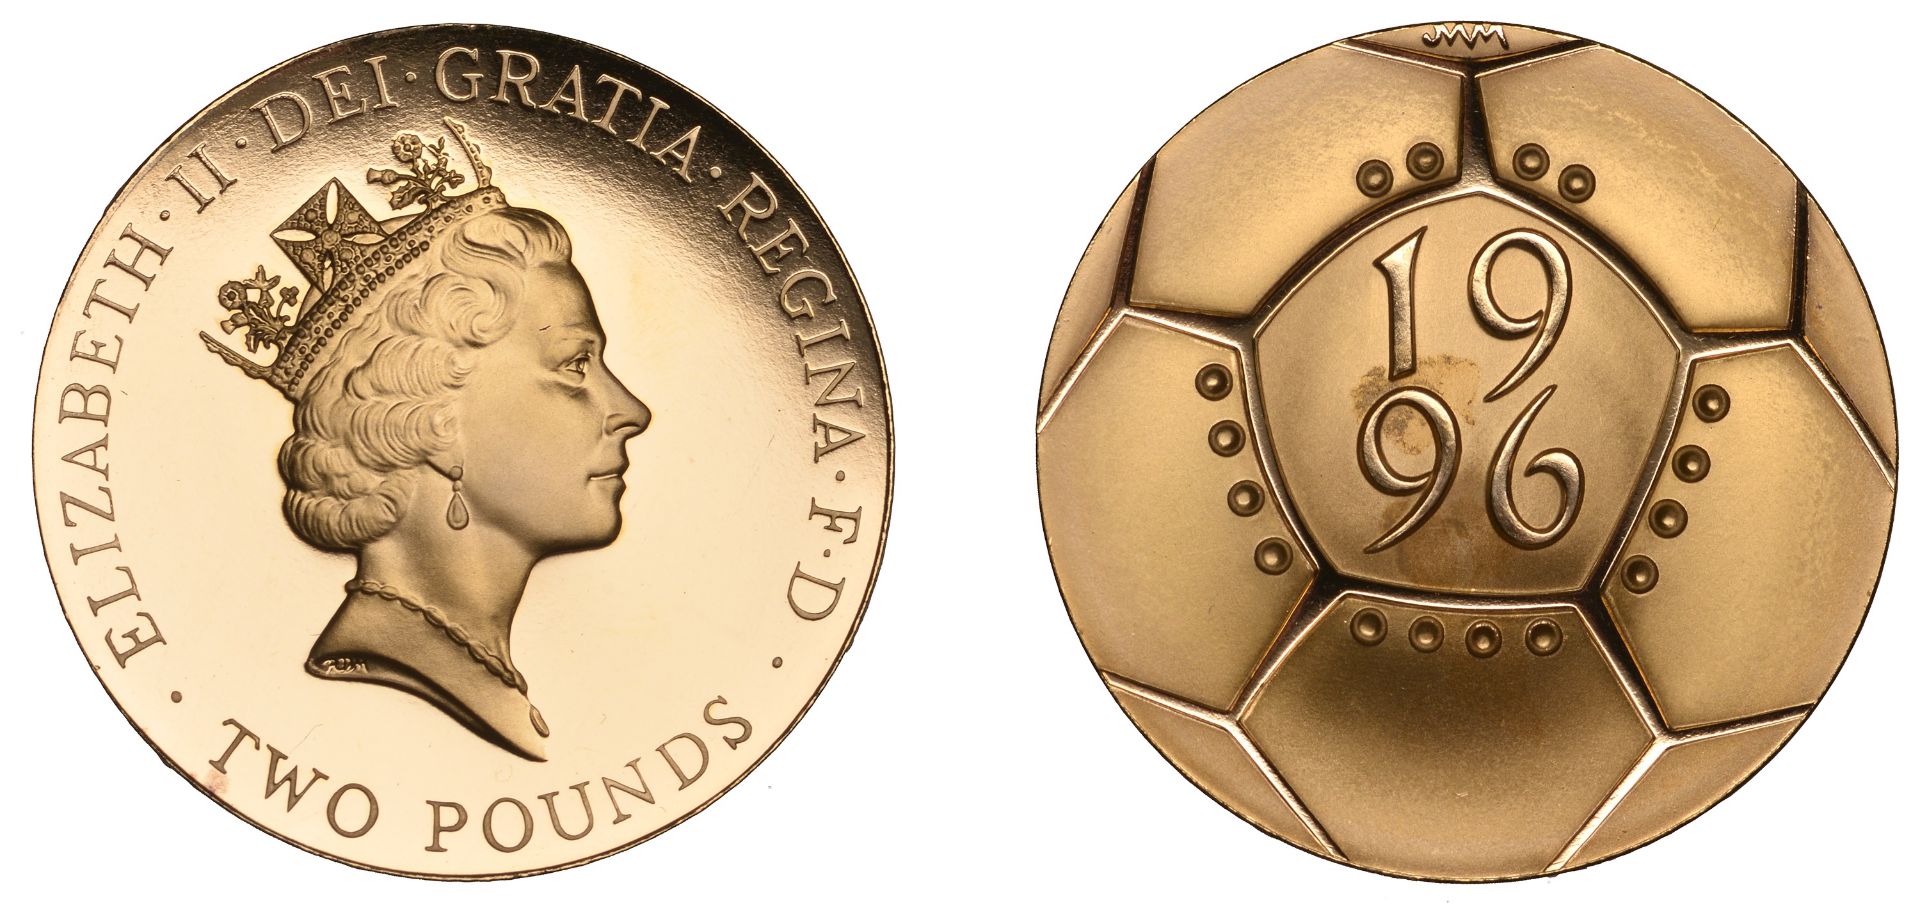 Elizabeth II (1952-2022), Decimal issues, Proof Two Pounds, 1996, in gold, European Football...